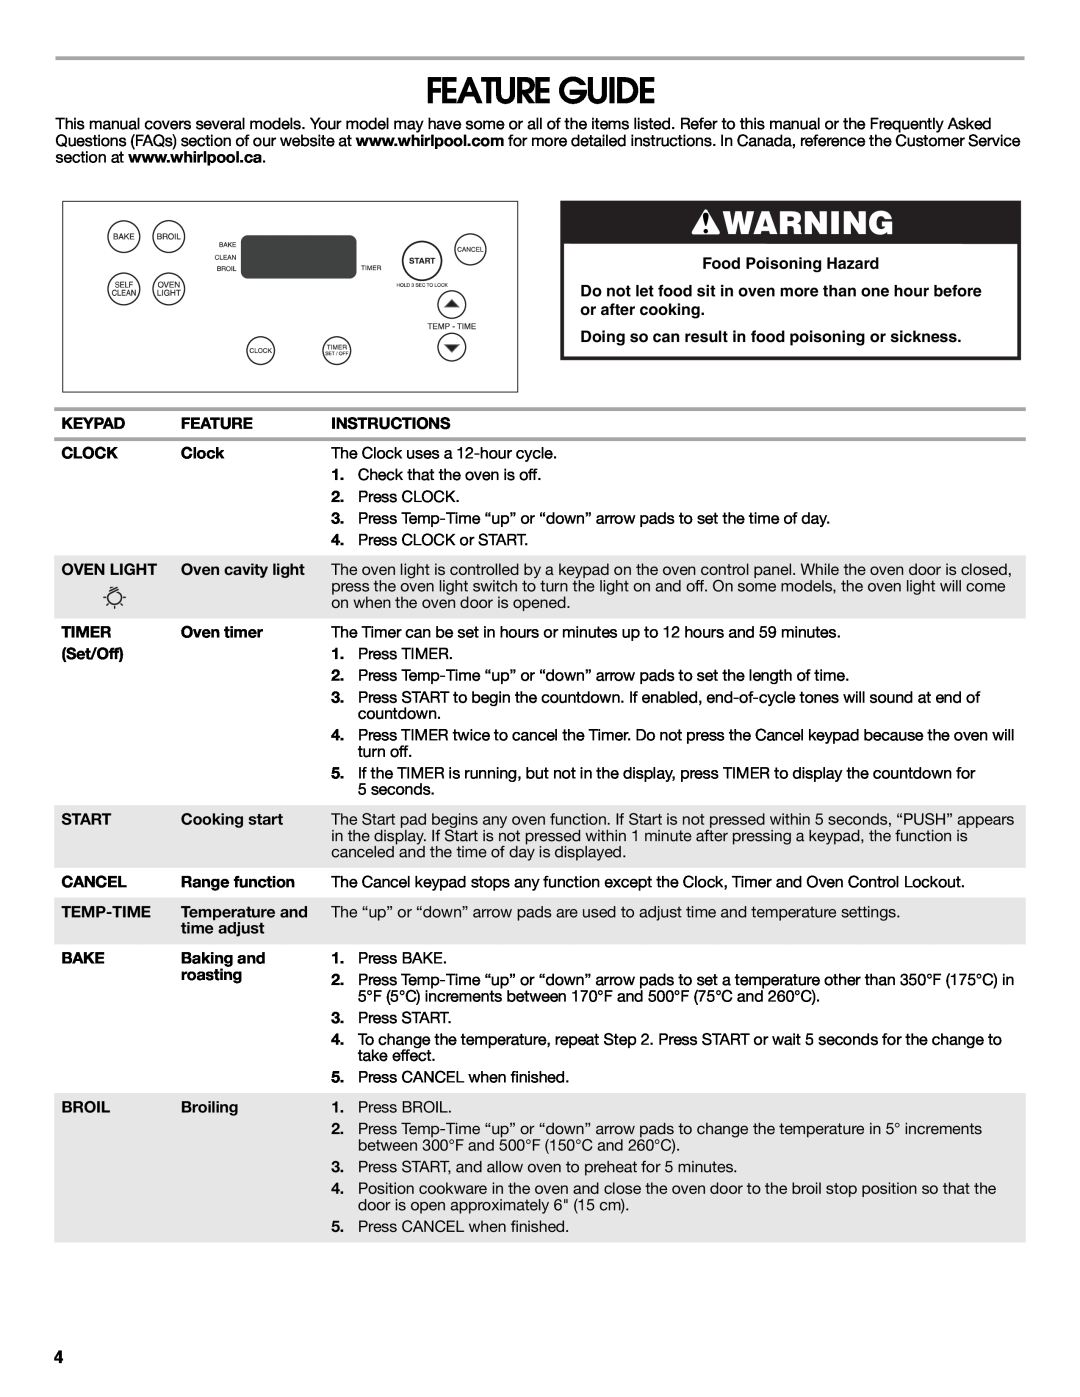 Whirlpool W10545225B warranty Feature Guide, Food Poisoning Hazard, Doing so can result in food poisoning or sickness 